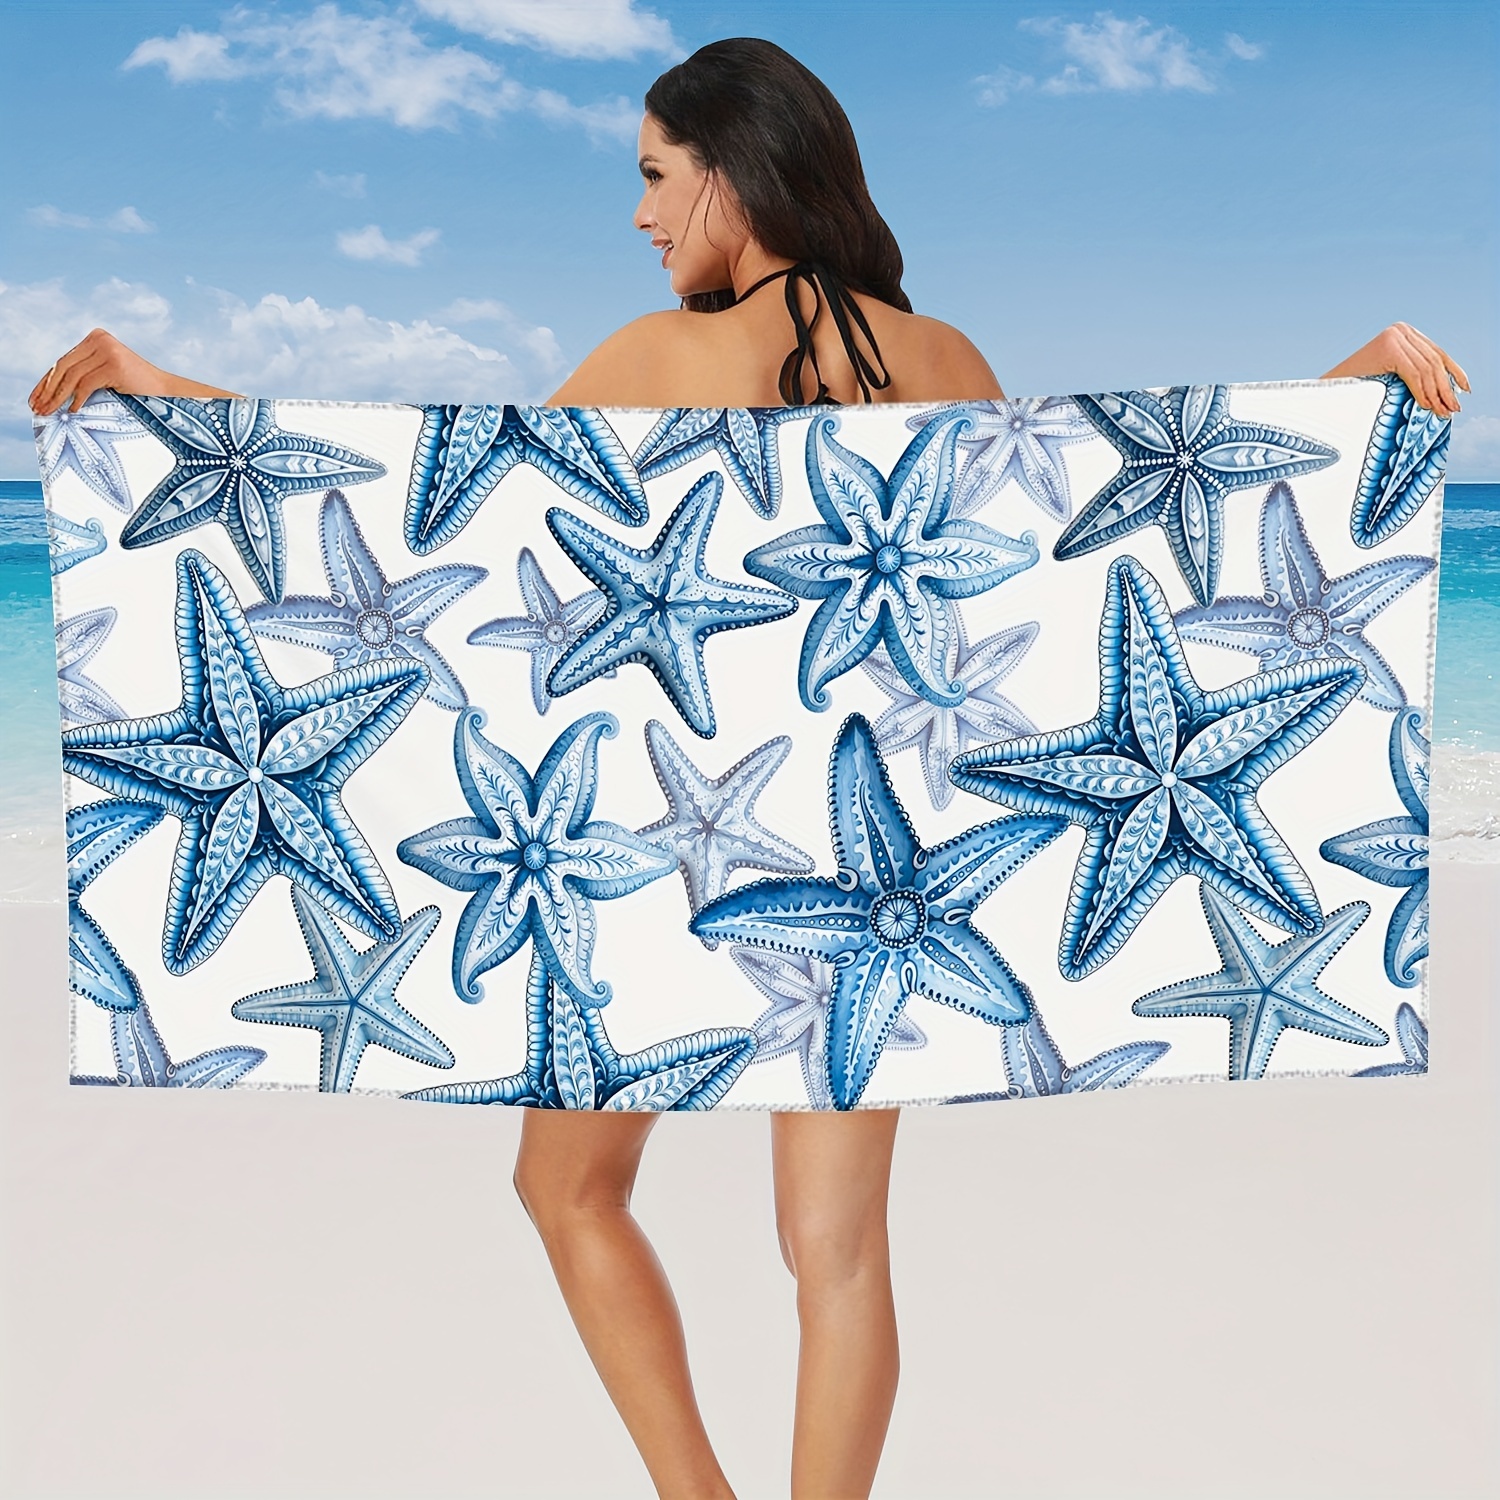 

1pc Starfish Microfiber Oversized Beach Towel, Durable Quick Drying Sunscreen Washable Bath Towel, Summer Beach Camping Swimming Pool Travel Essentials